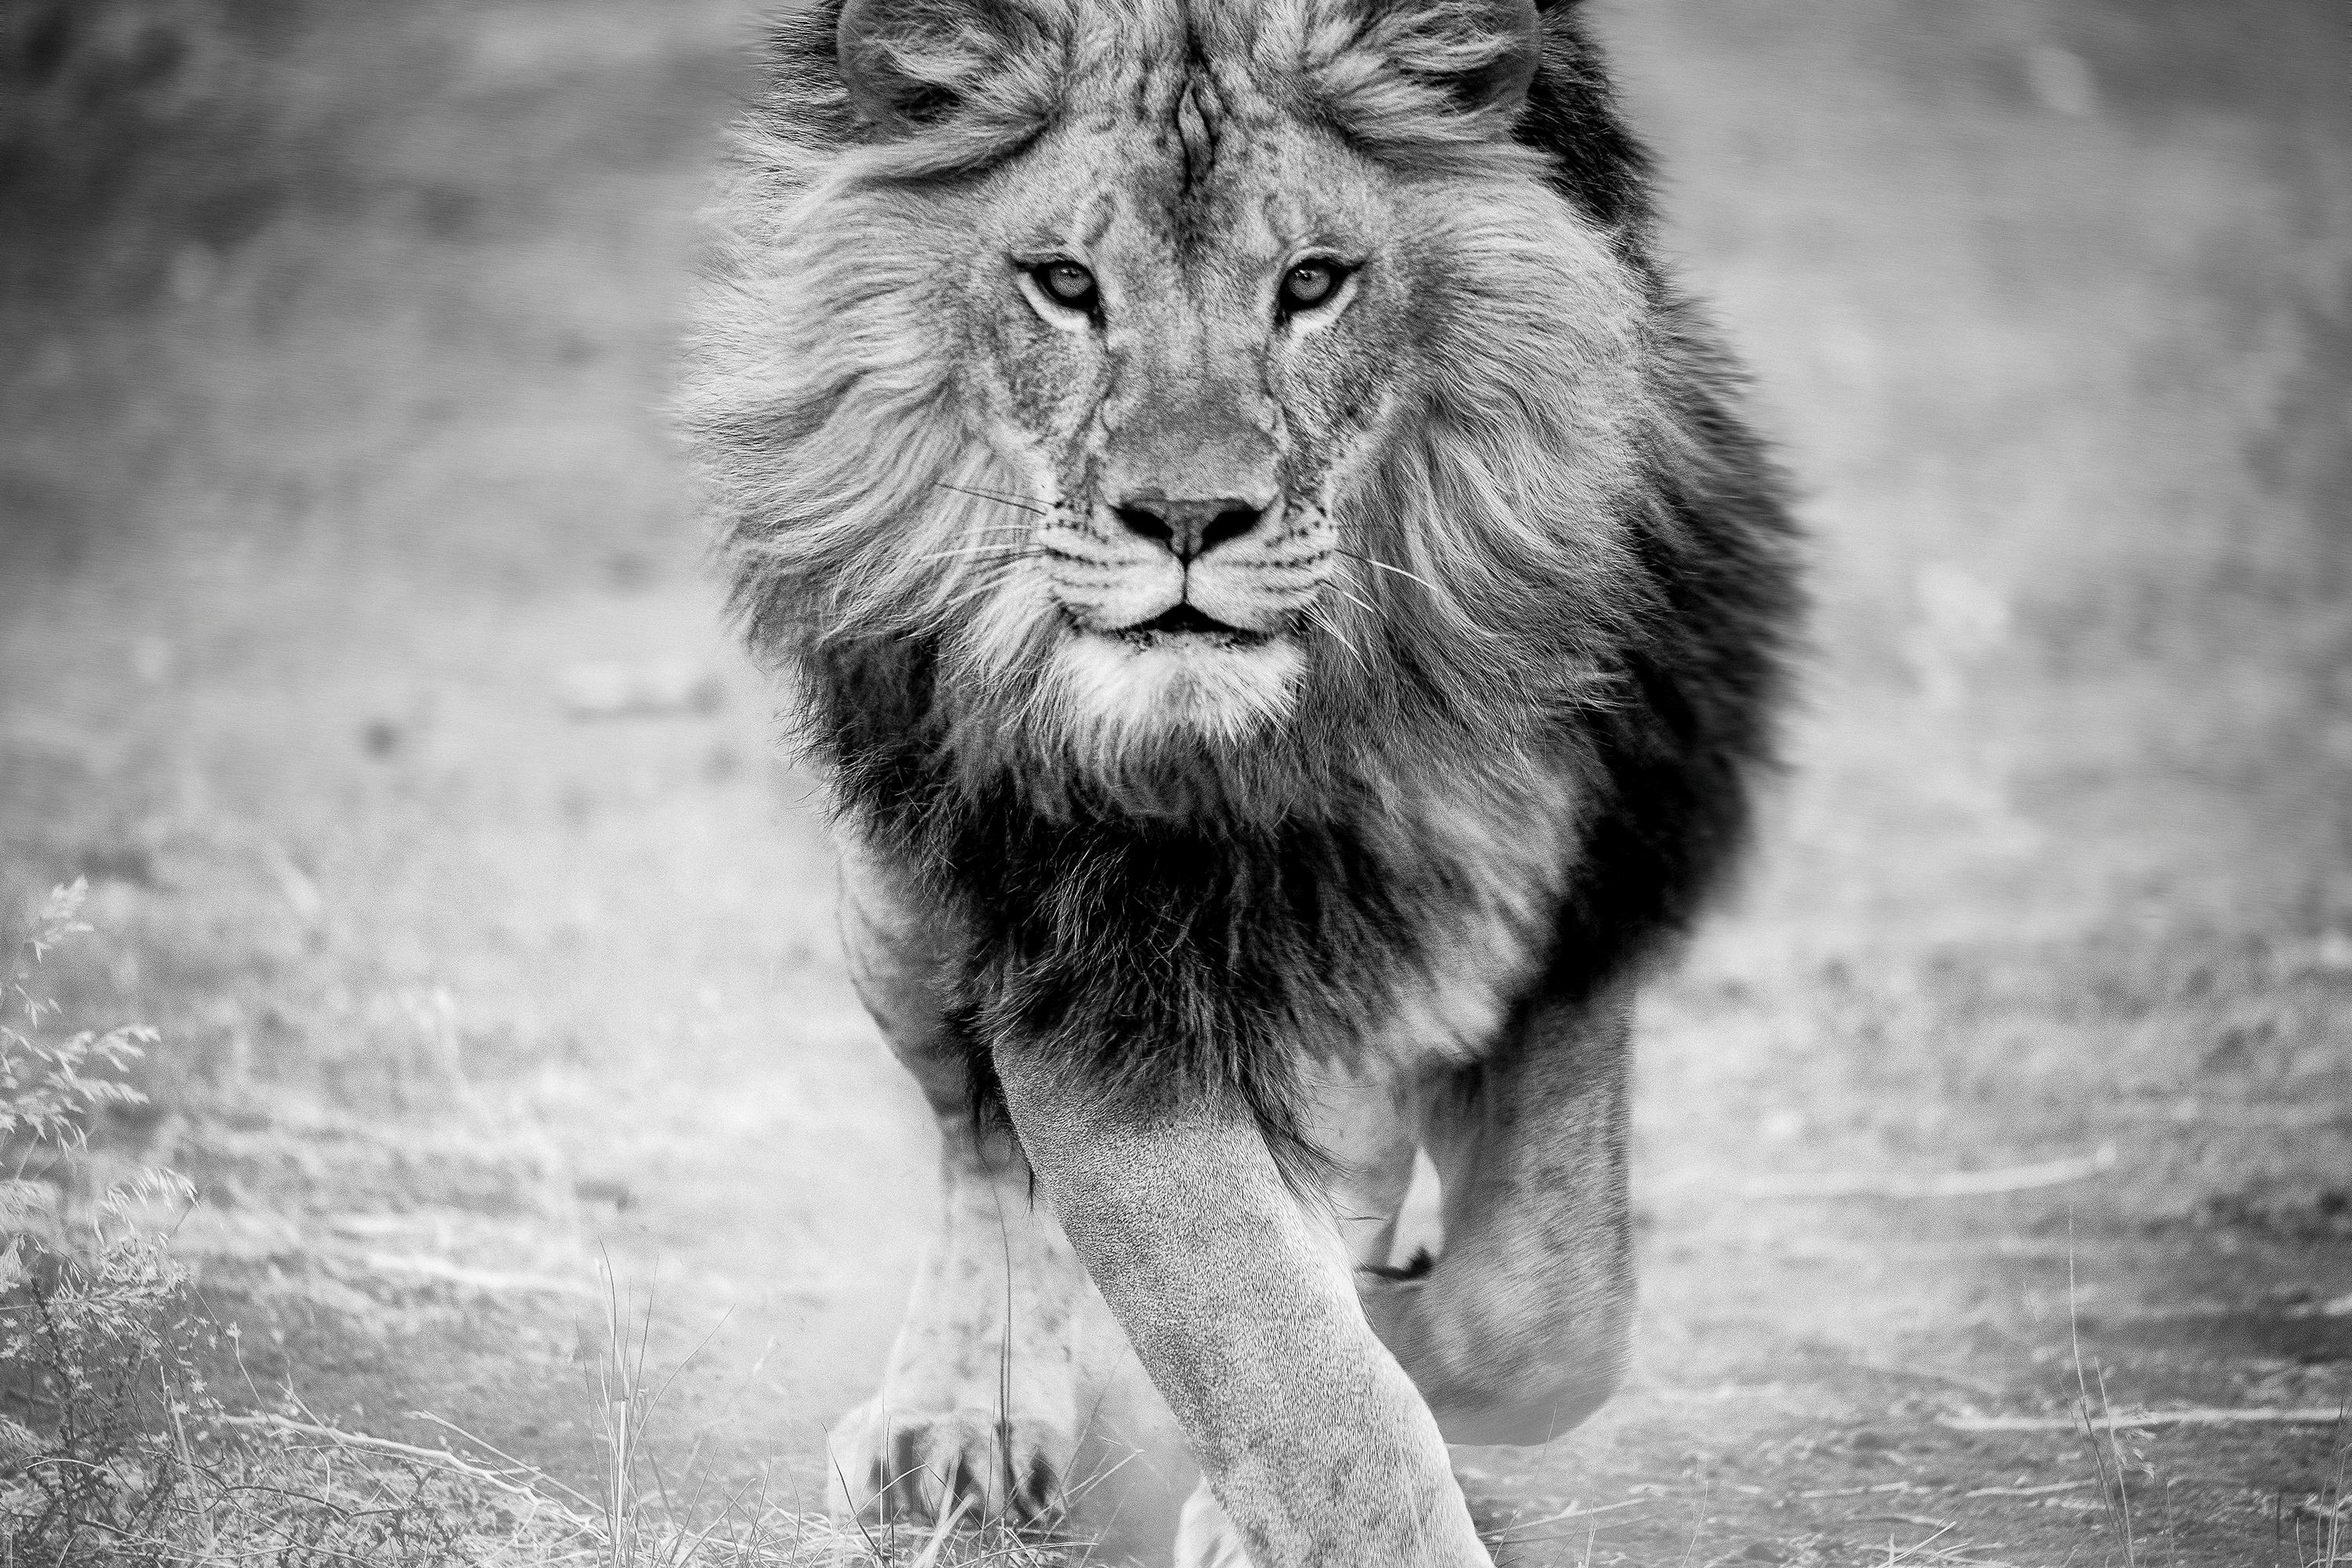 Shane Russeck Black and White Photograph - "Panthera Leo" -  Black & White Photography, Lion 